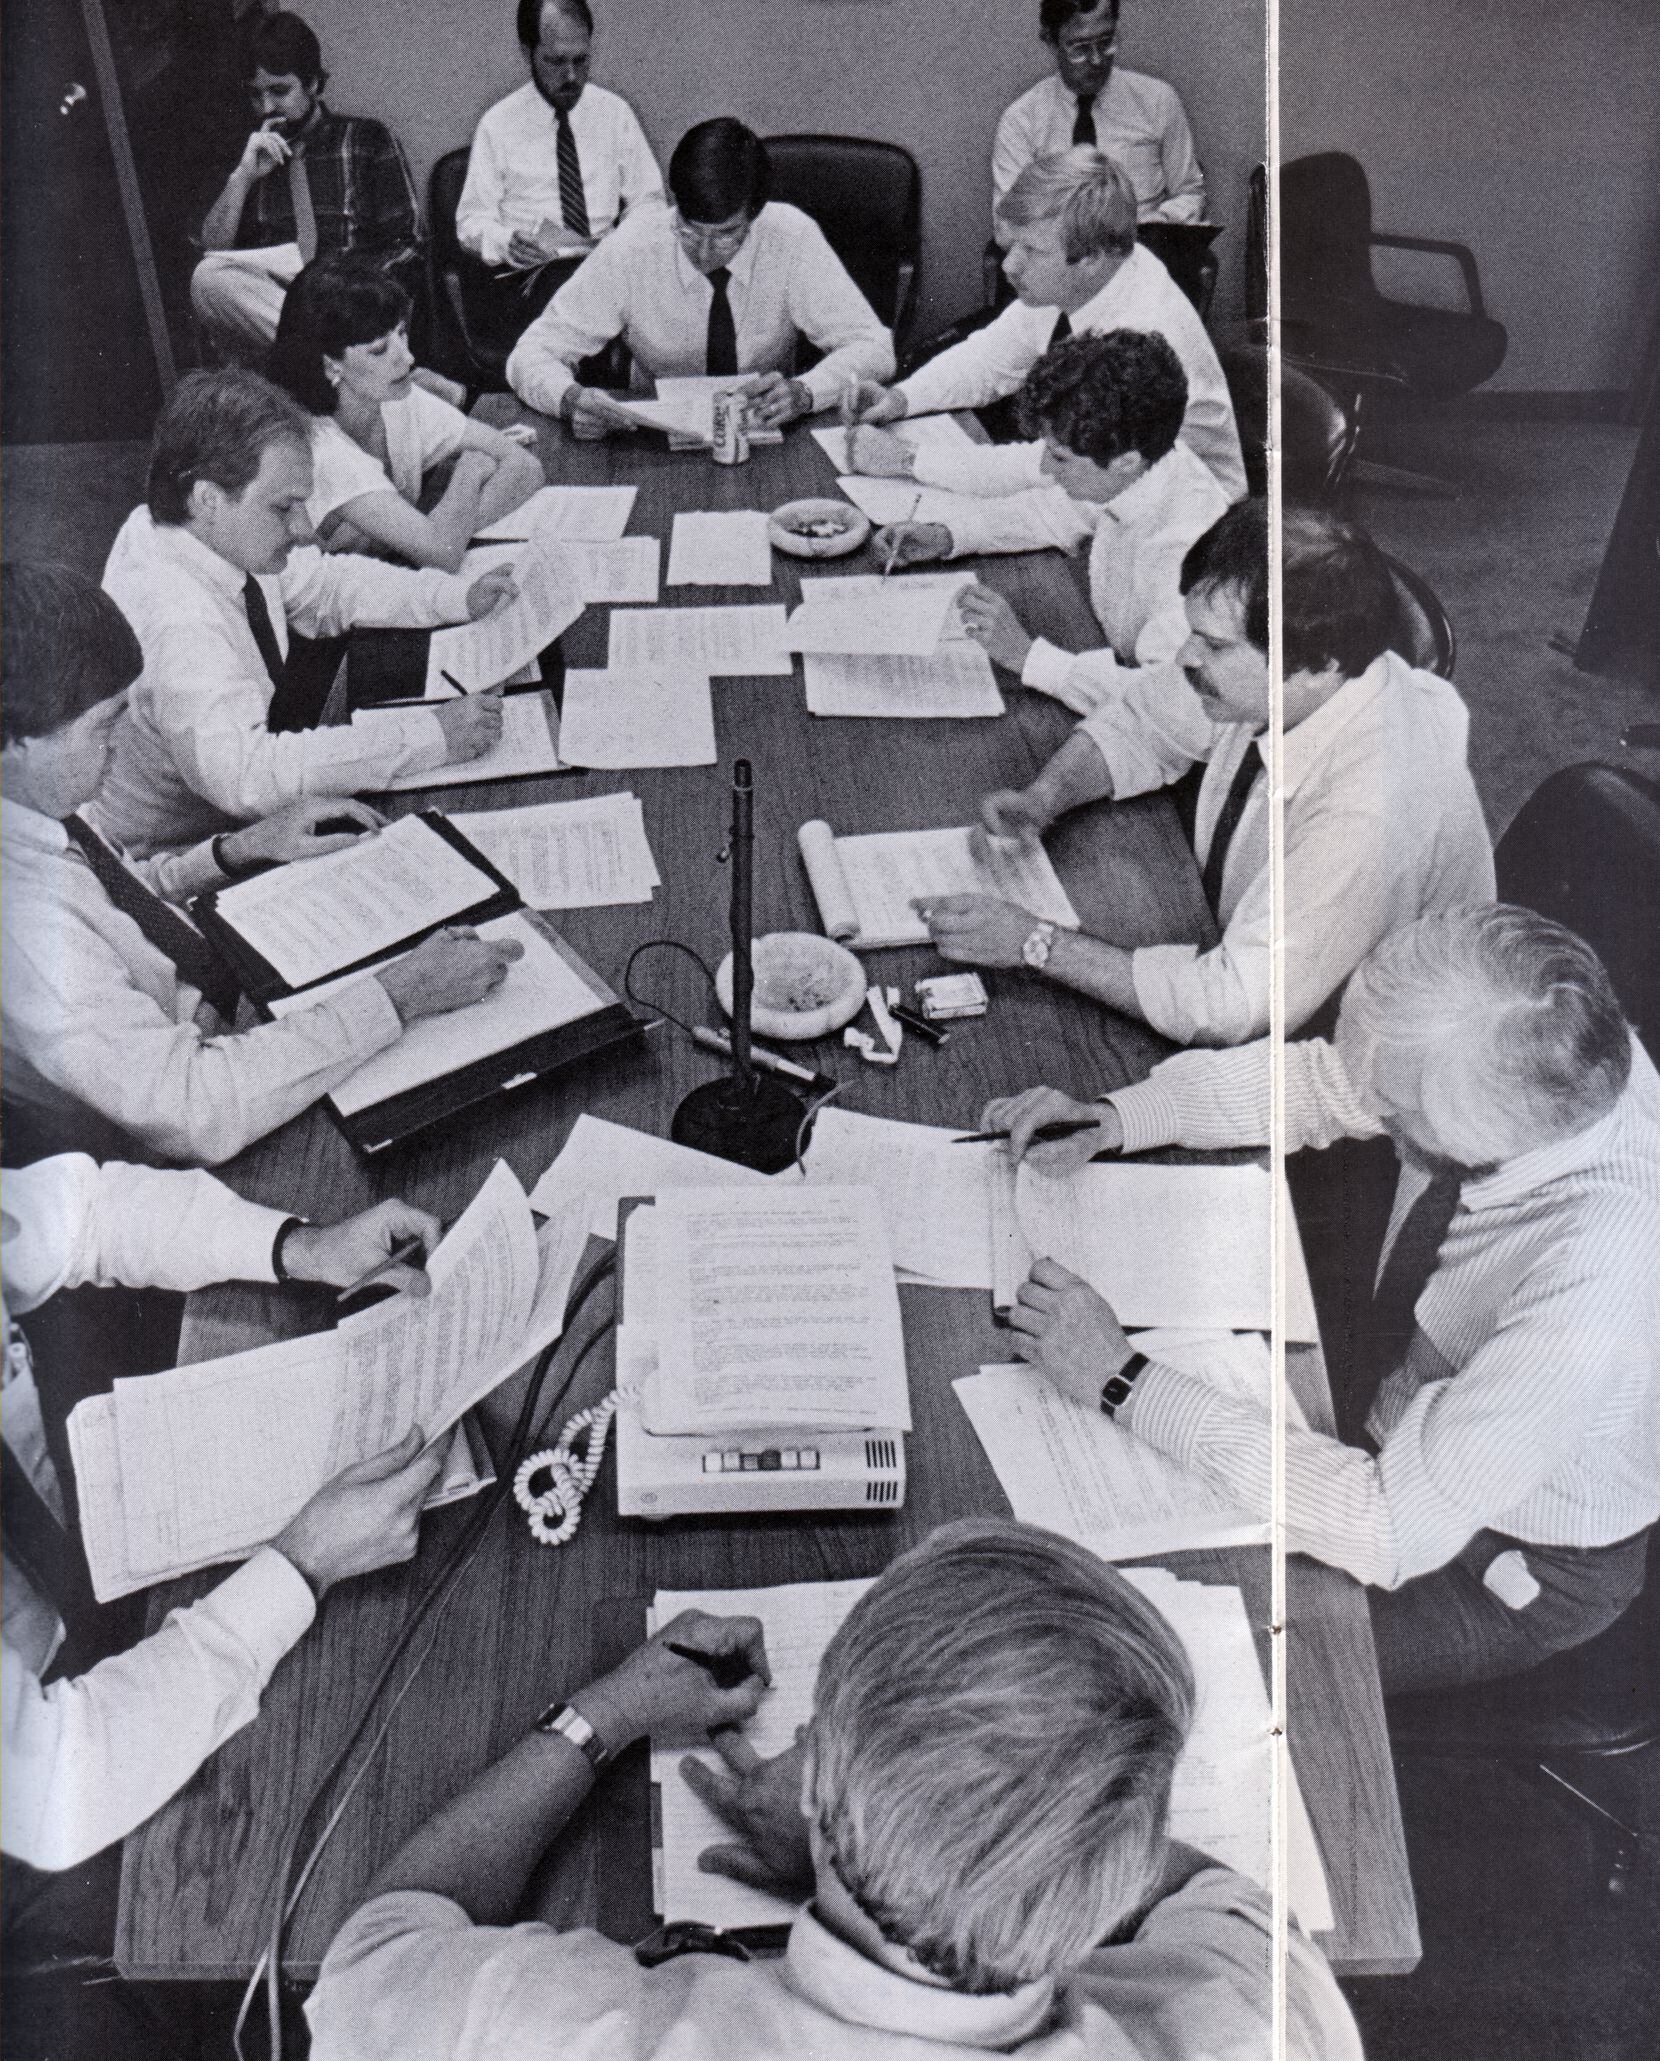 In 1985, Dallas Morning News editors were shown gathering at the daily 3 p.m. "budget" meeting. Ralph Langer is on the far right along the back wall.